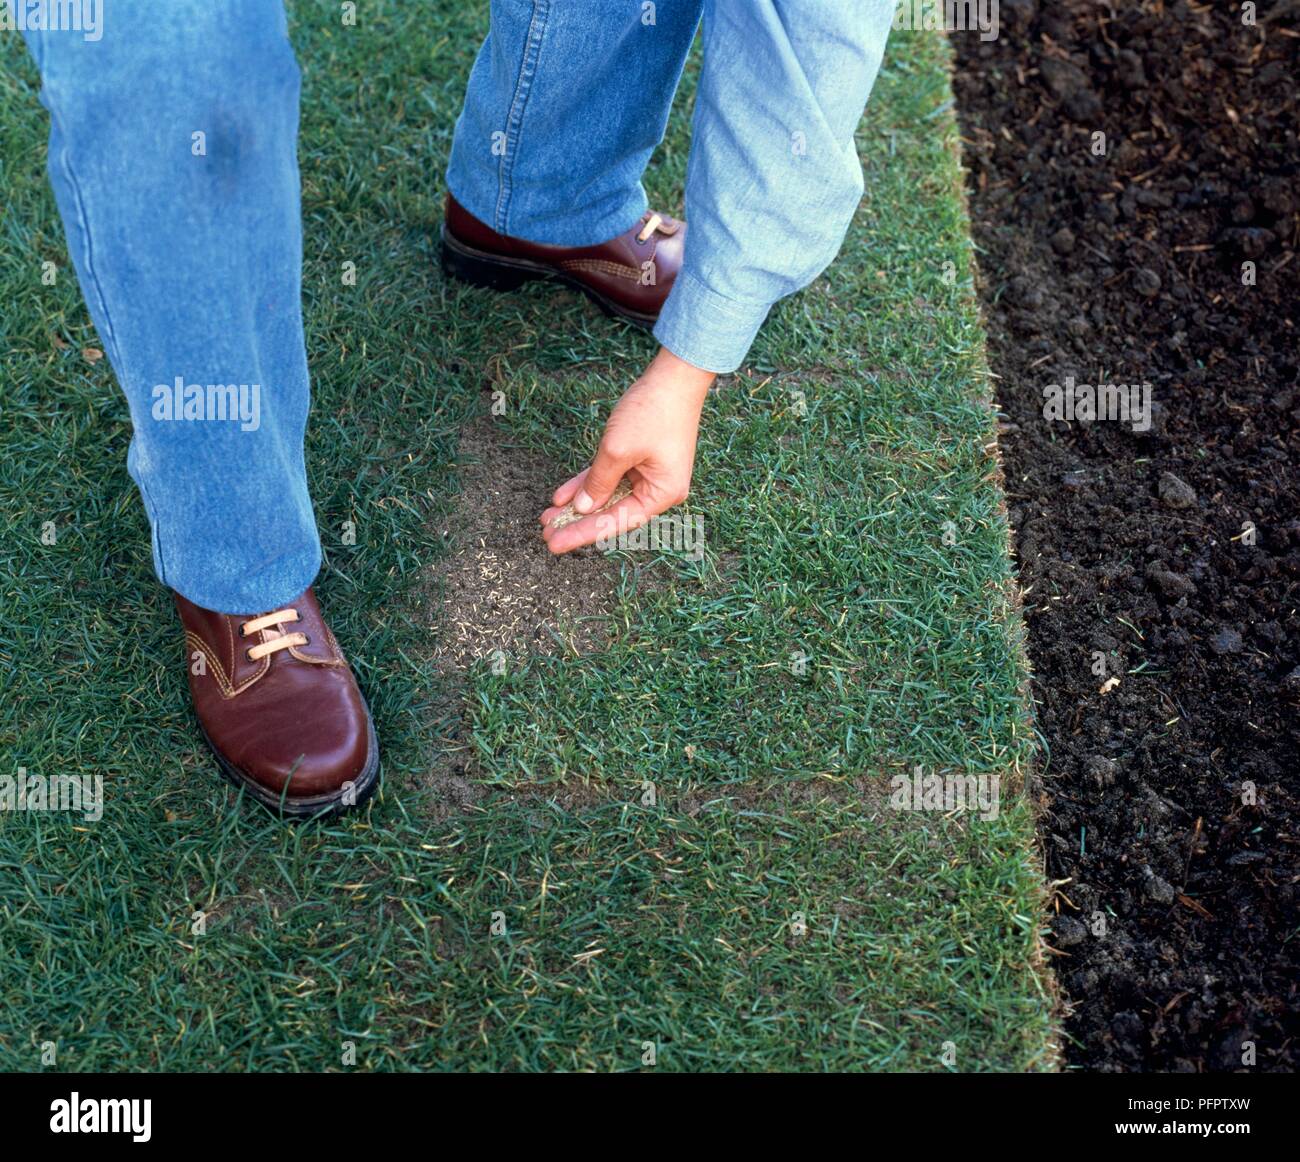 Person sprinkling sandy loam onto damaged part of lawn Stock Photo